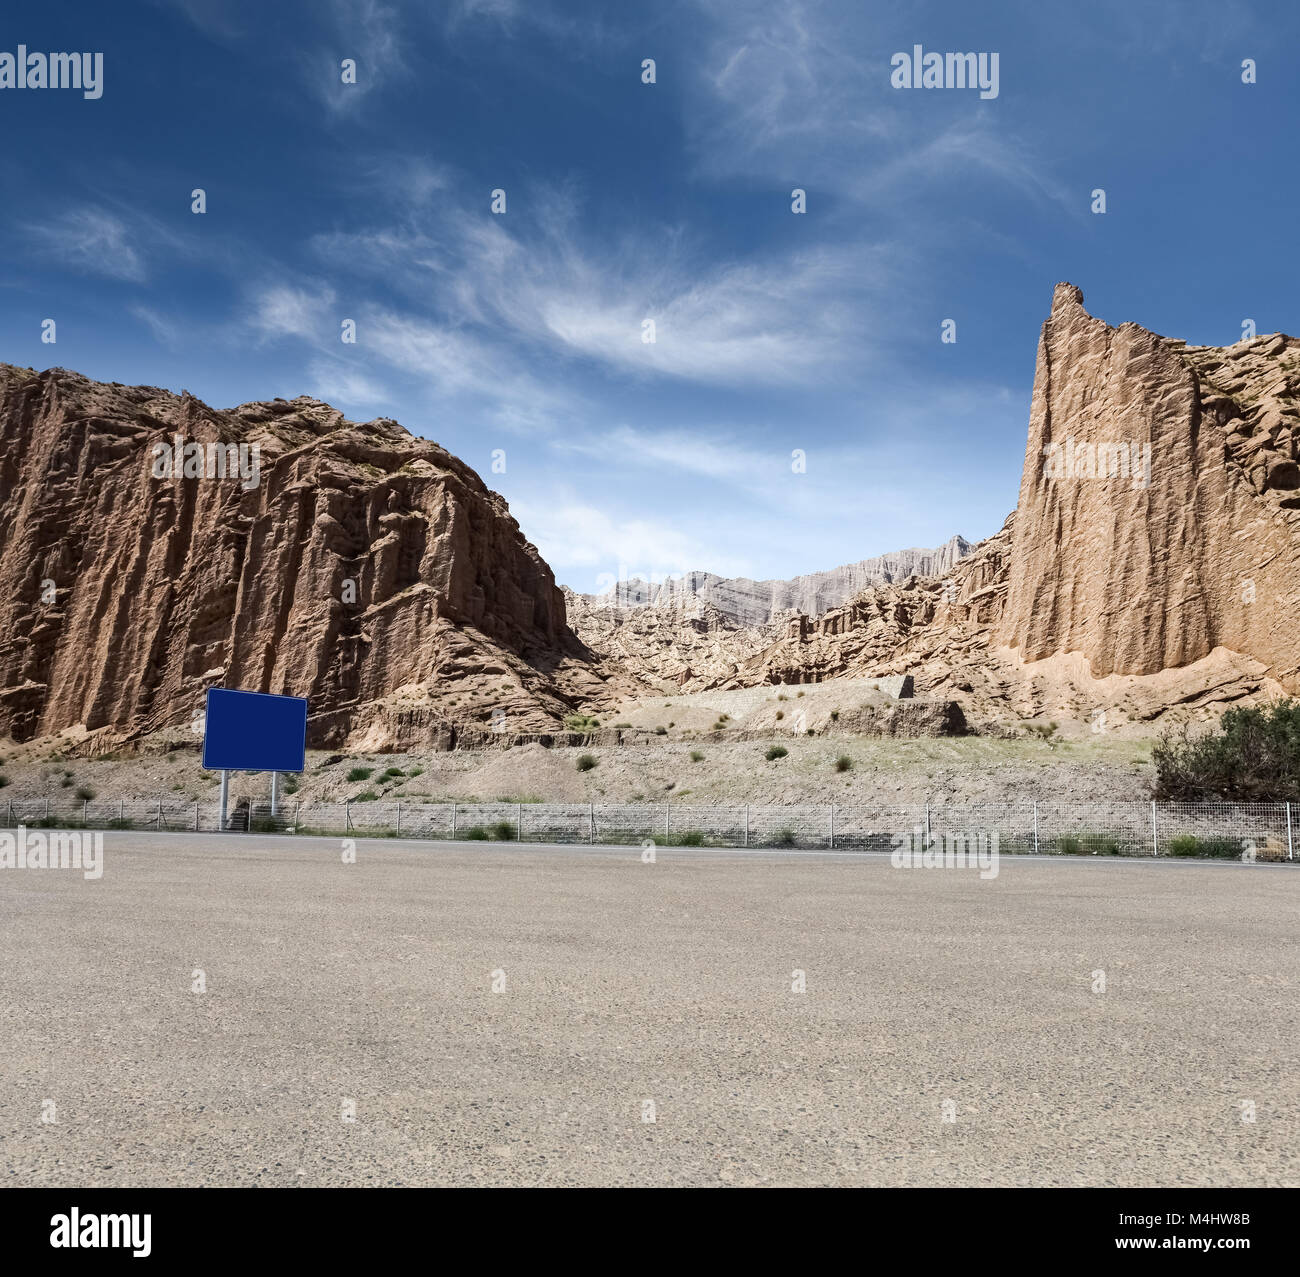 empty asphalt road with xinjiang geological landscape Stock Photo